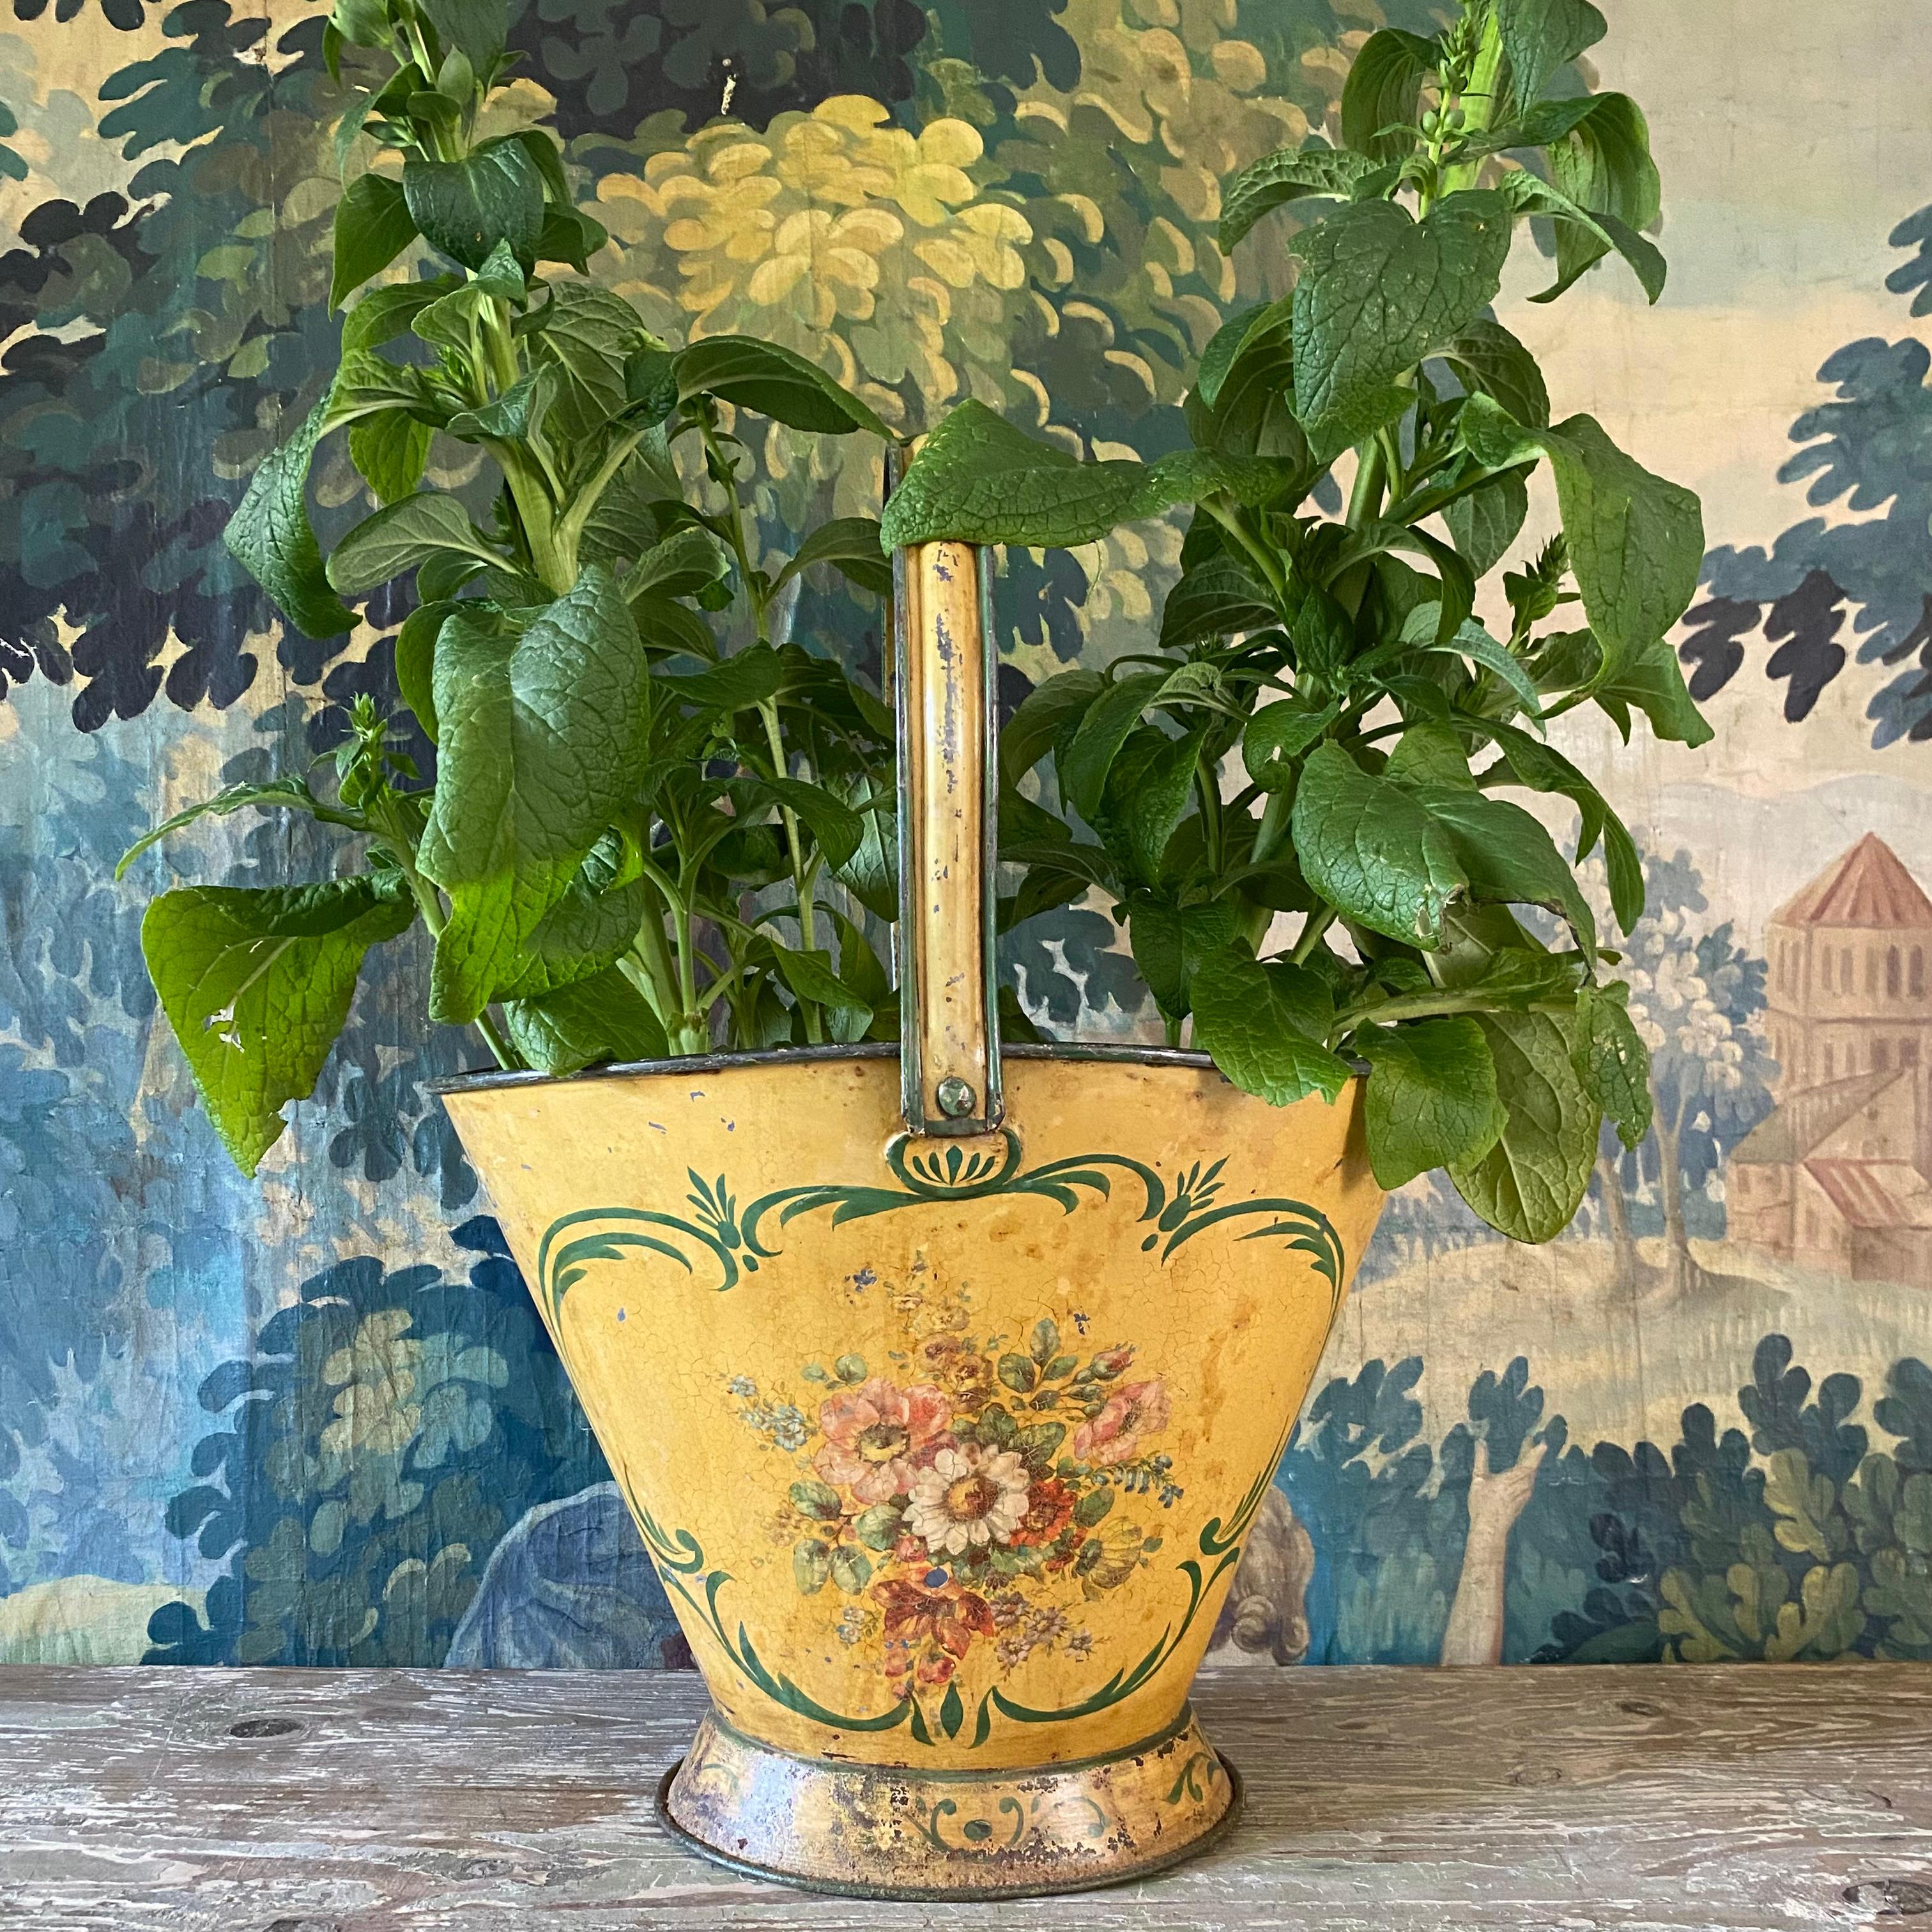 A very large 19th century hand painted toleware flower basket/bucket in the most beautiful colours - a soft yellow background with green lines and predominantly pink and white flowers - hand painted on both sides with various flowers including